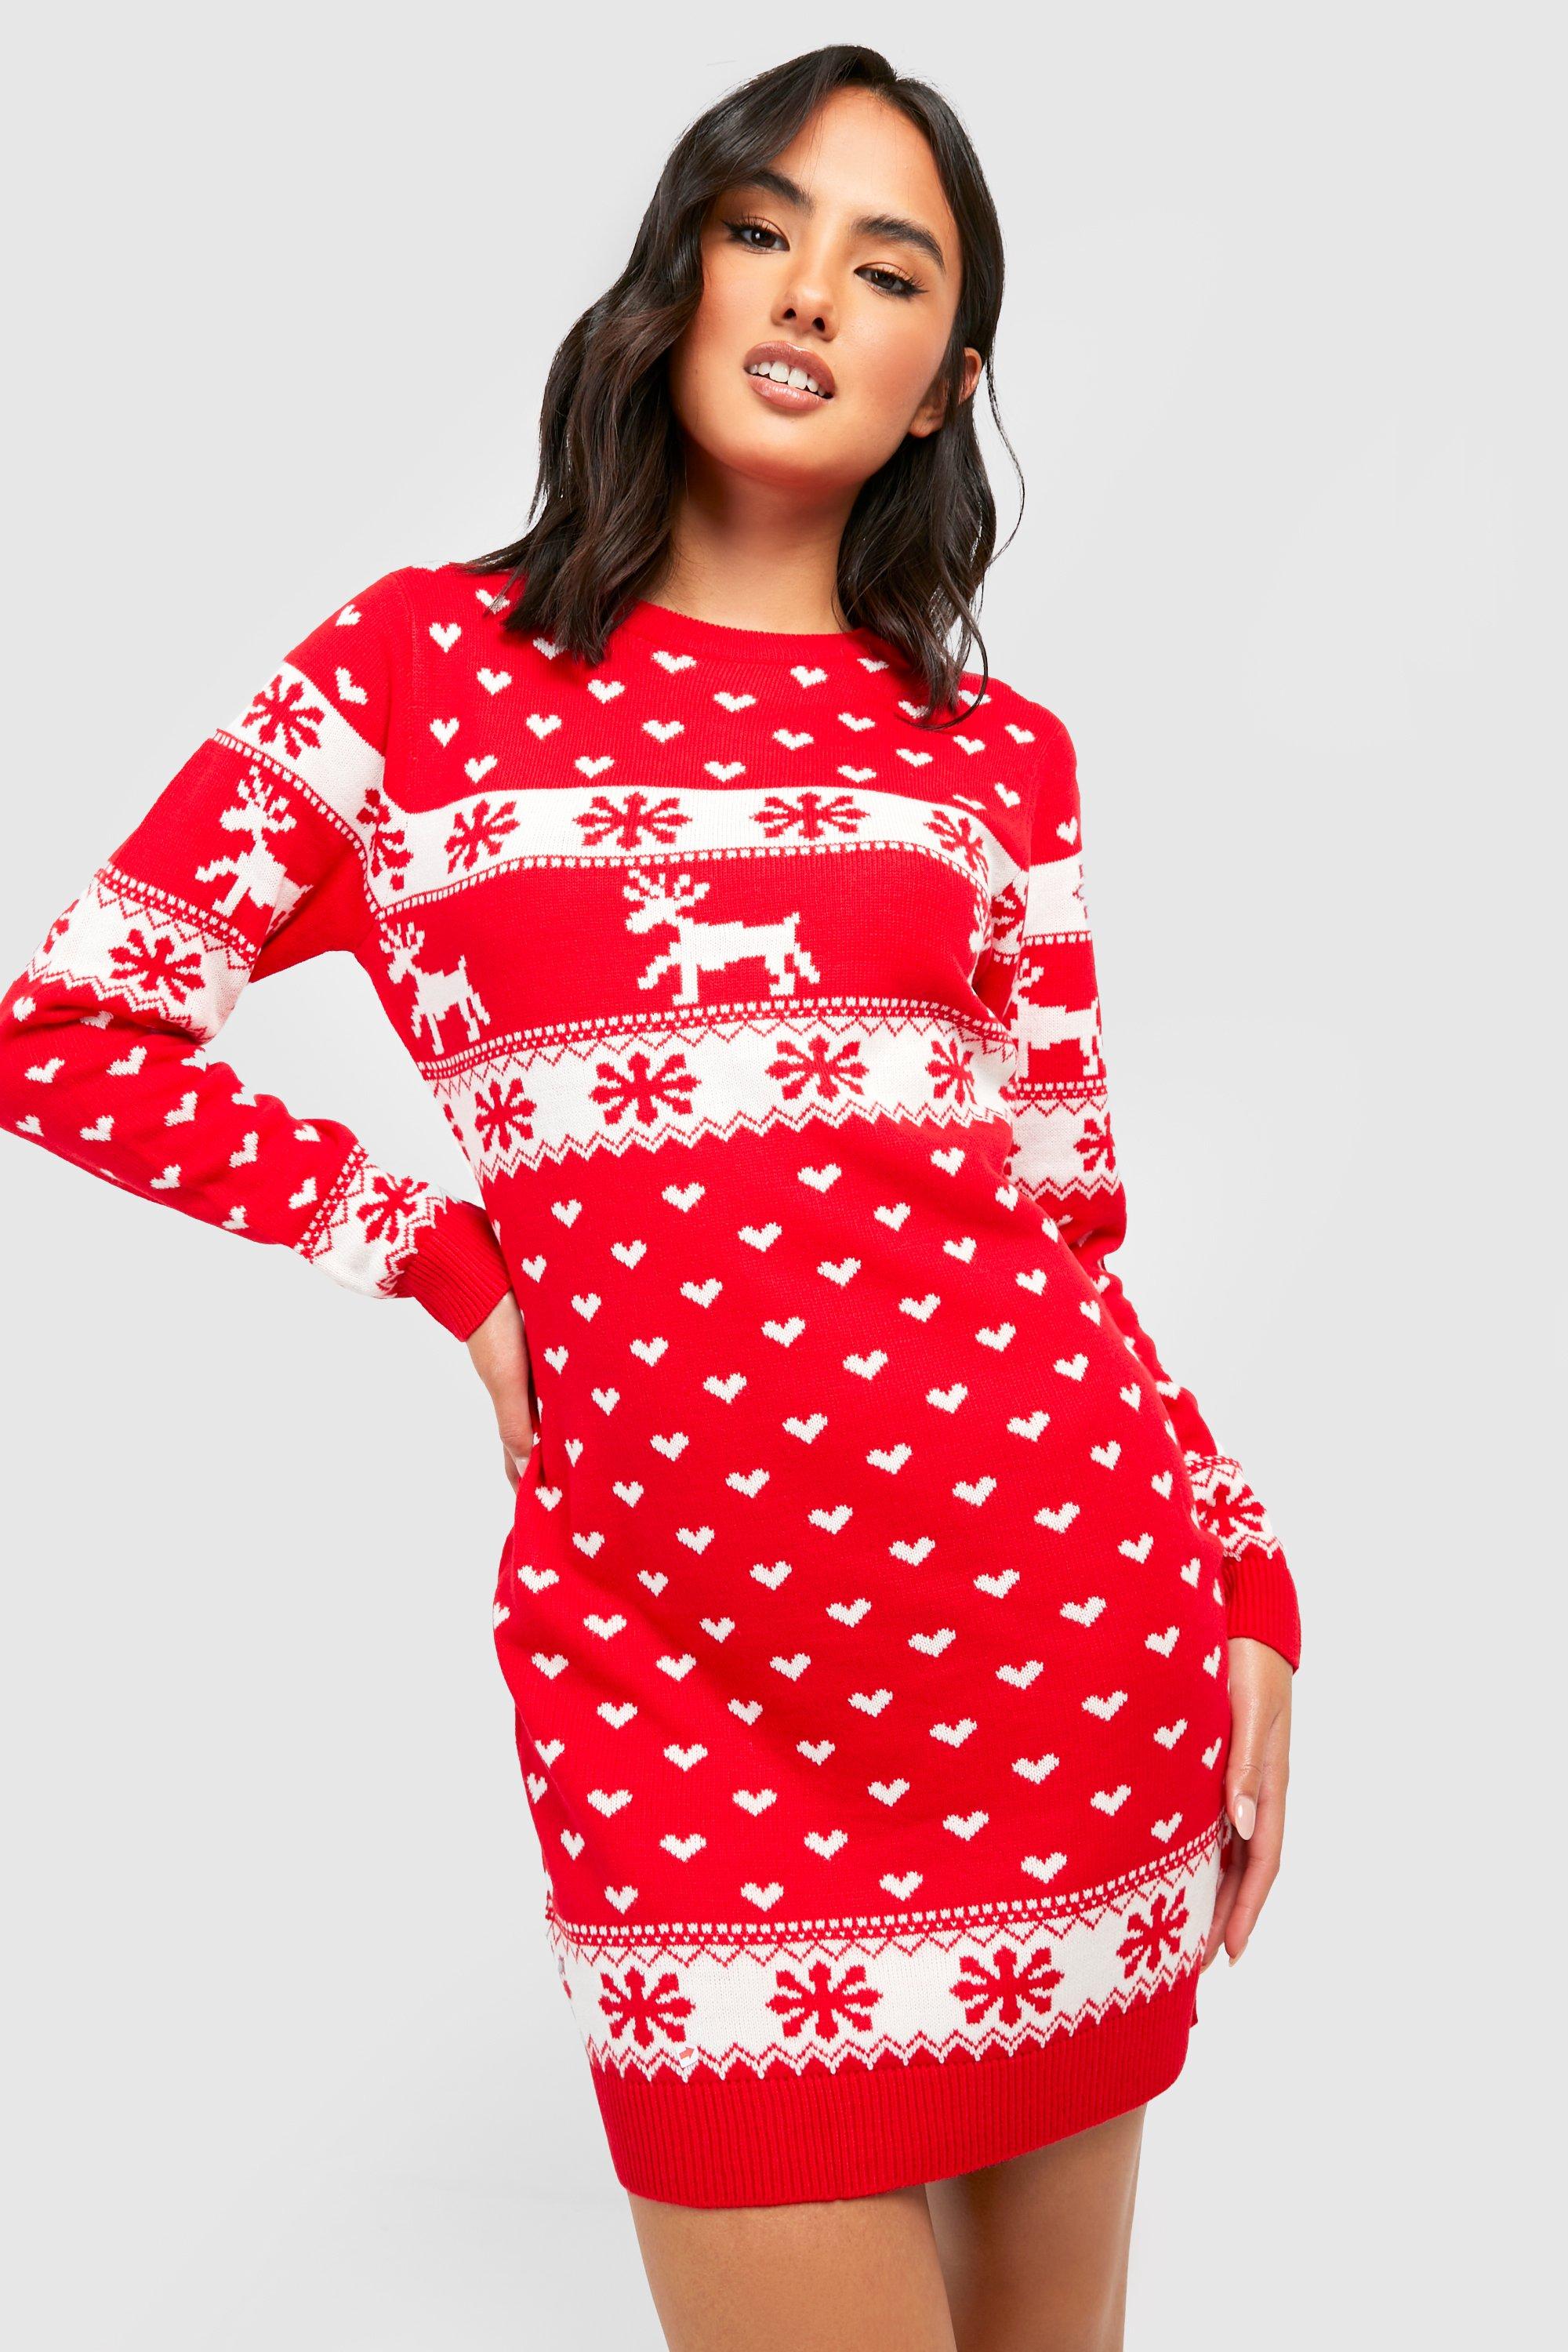 Sweater Dress Knitted Christmas Winter Dress Women Bodycon Solid